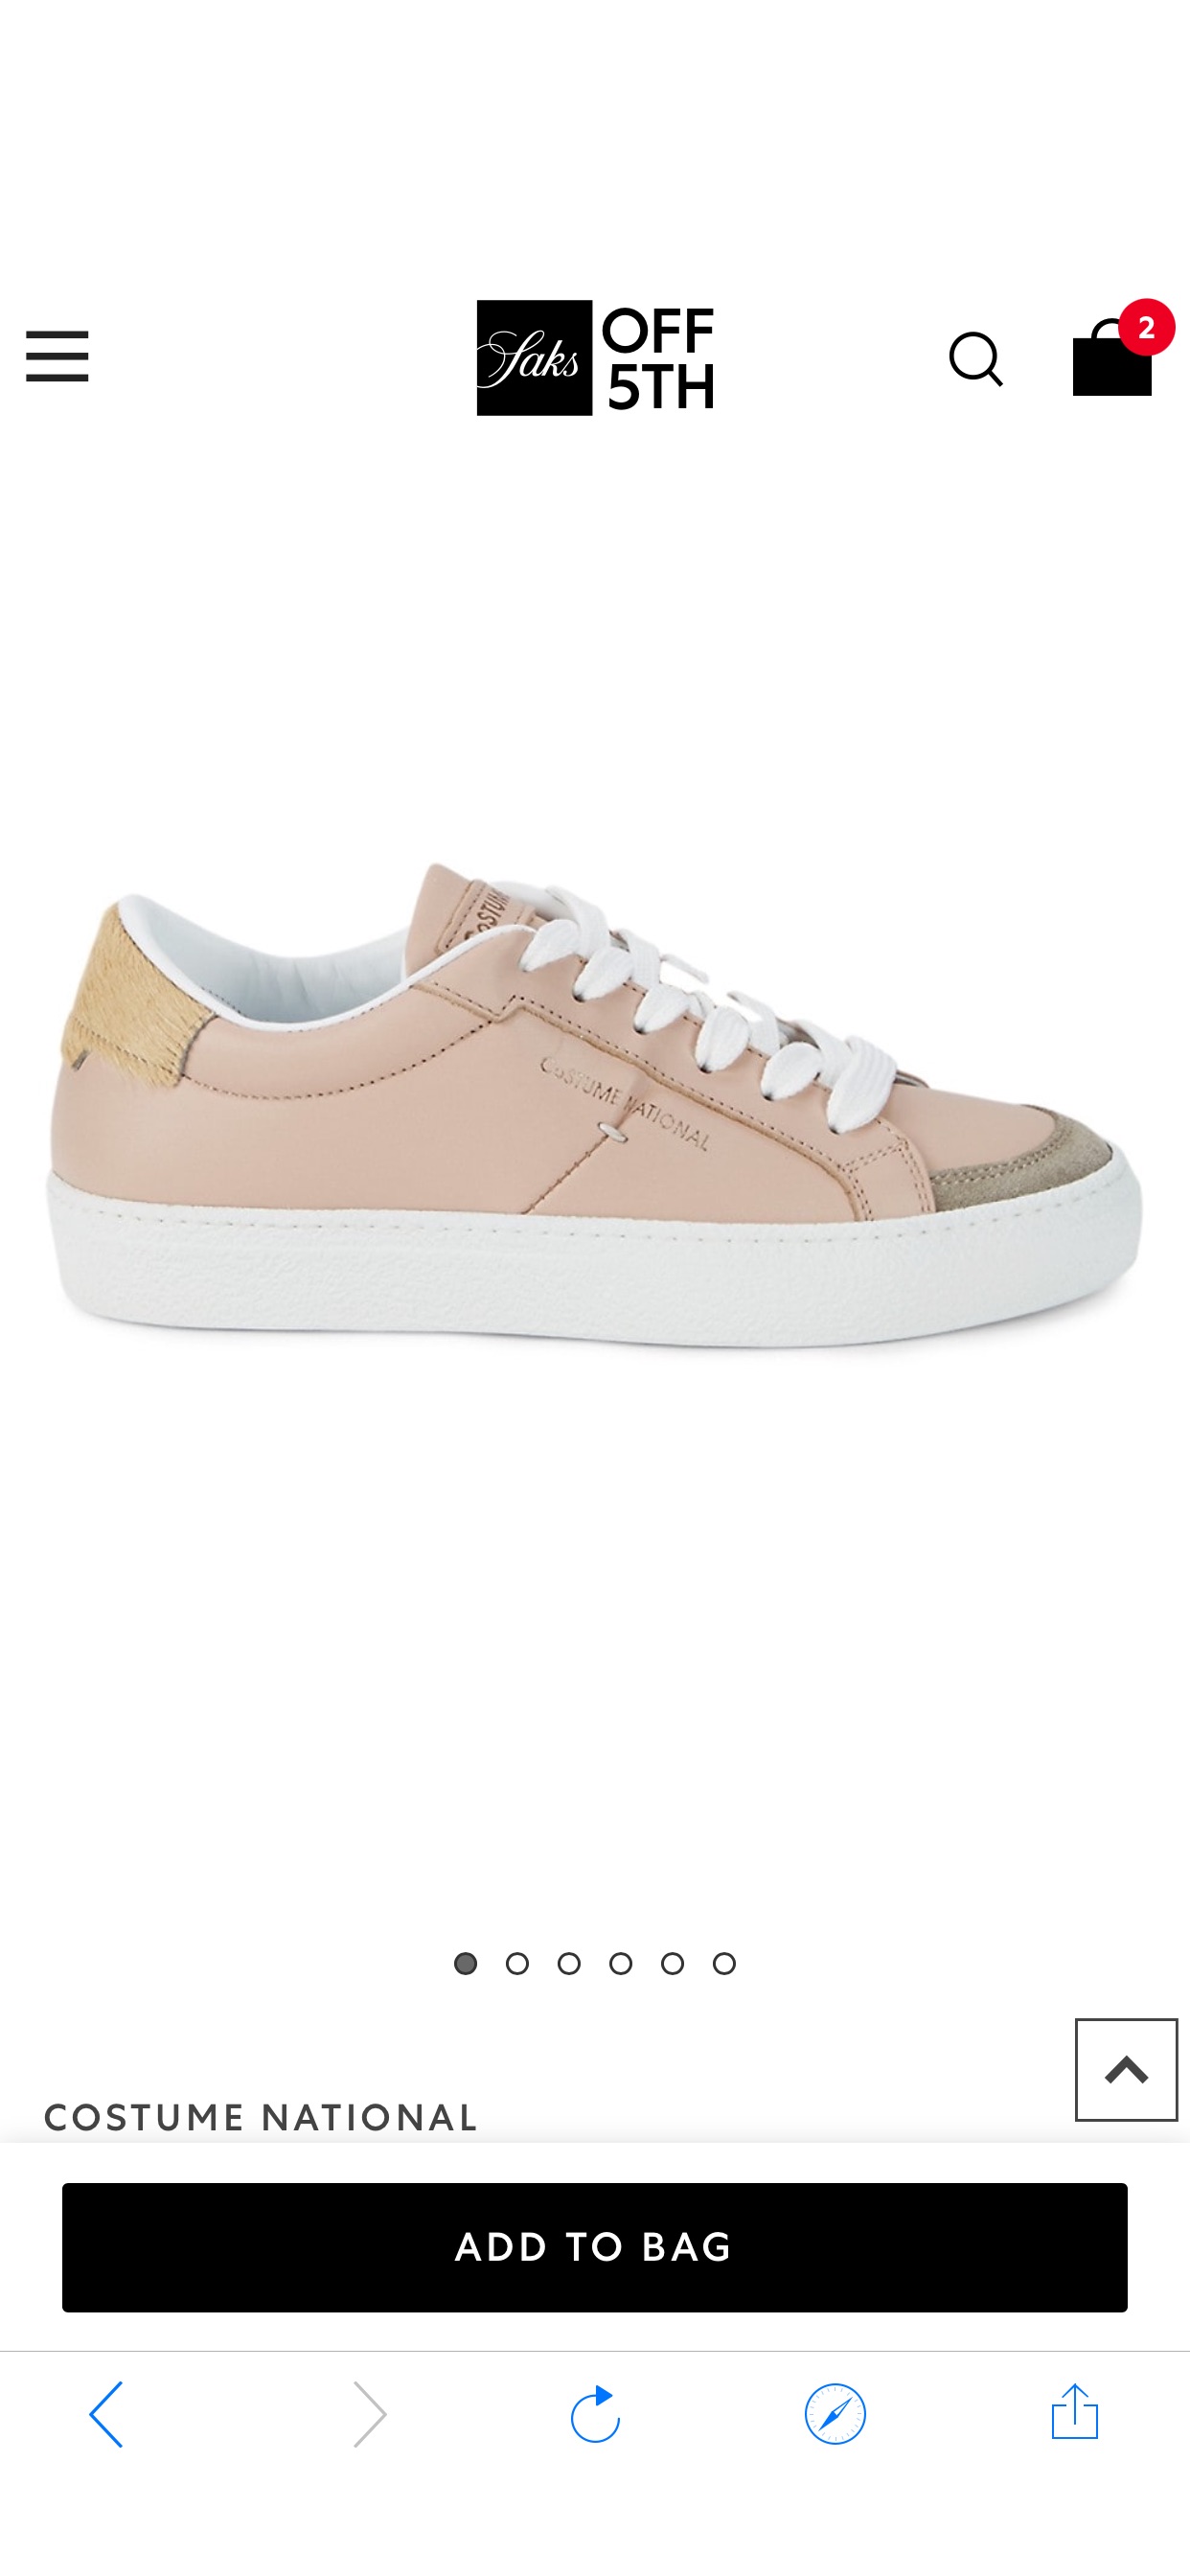 Costume National Calf Hair-Trim Leather & Suede Sneakers on SALE | Saks OFF 5TH
鞋子